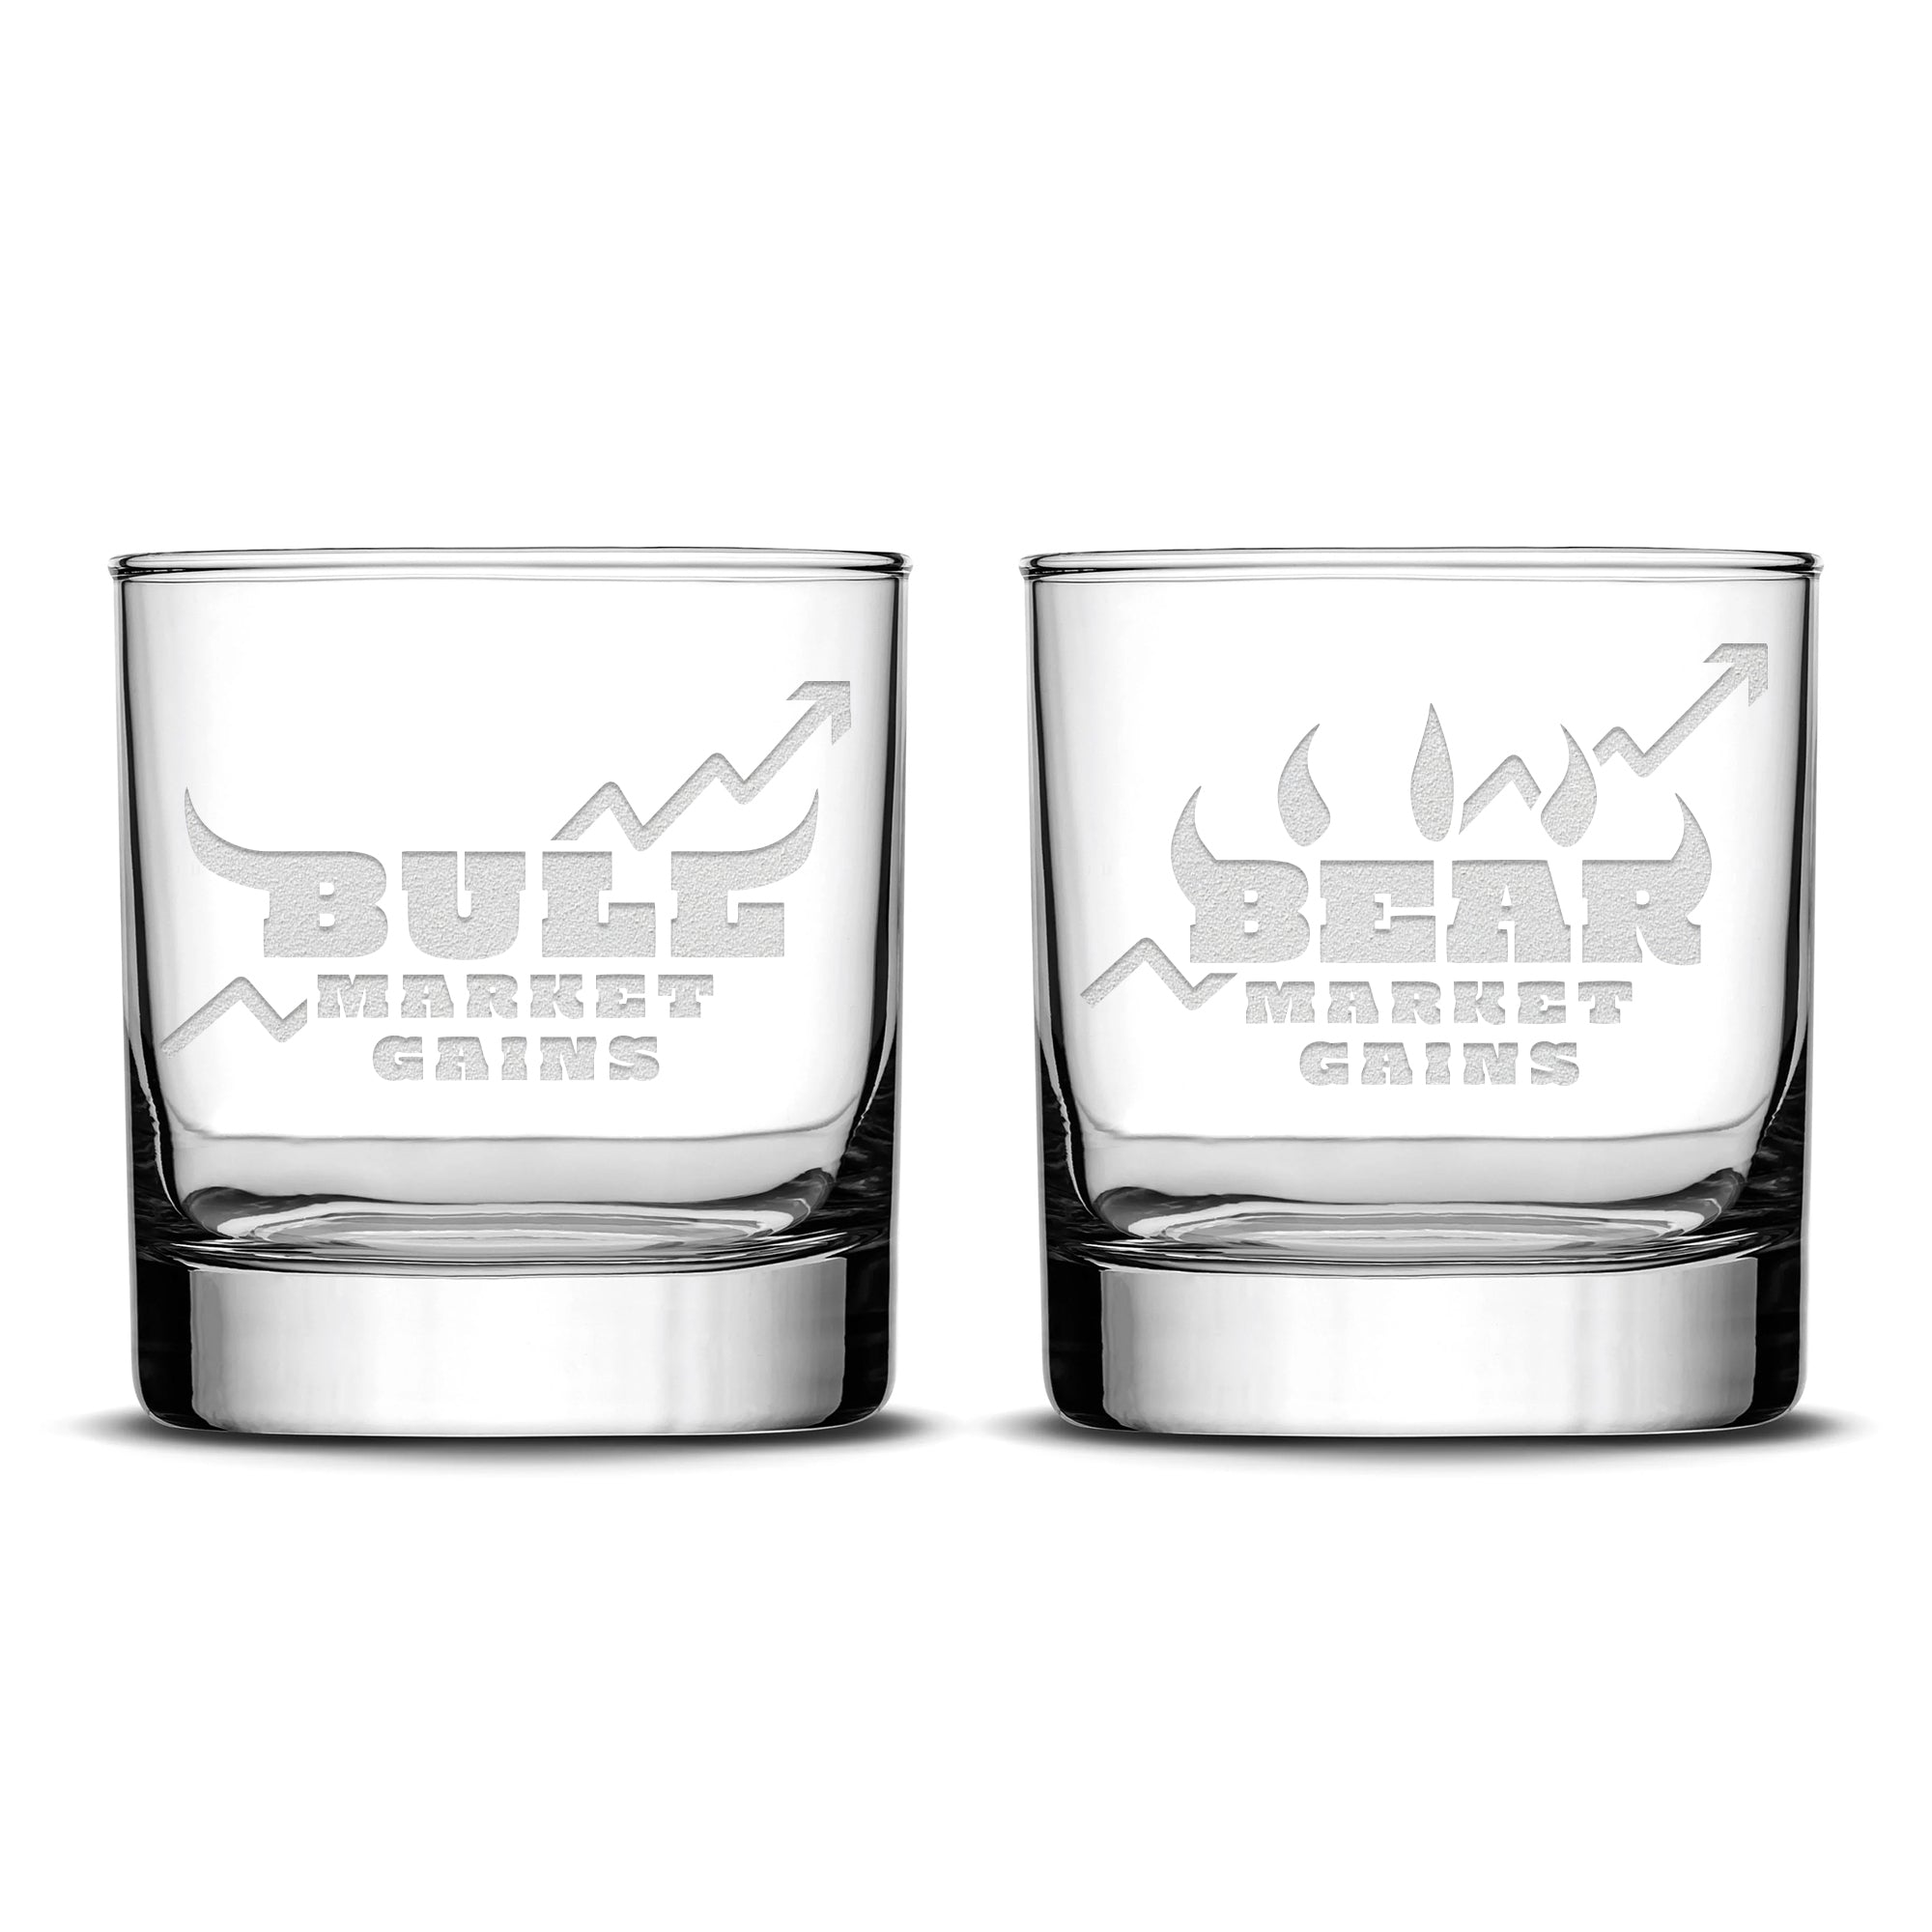 Integrity Bottles Premium, Stock Market Gains, Whiskey Glass (Set of 2), Hand Made in USA, Sand Etched, 11oz